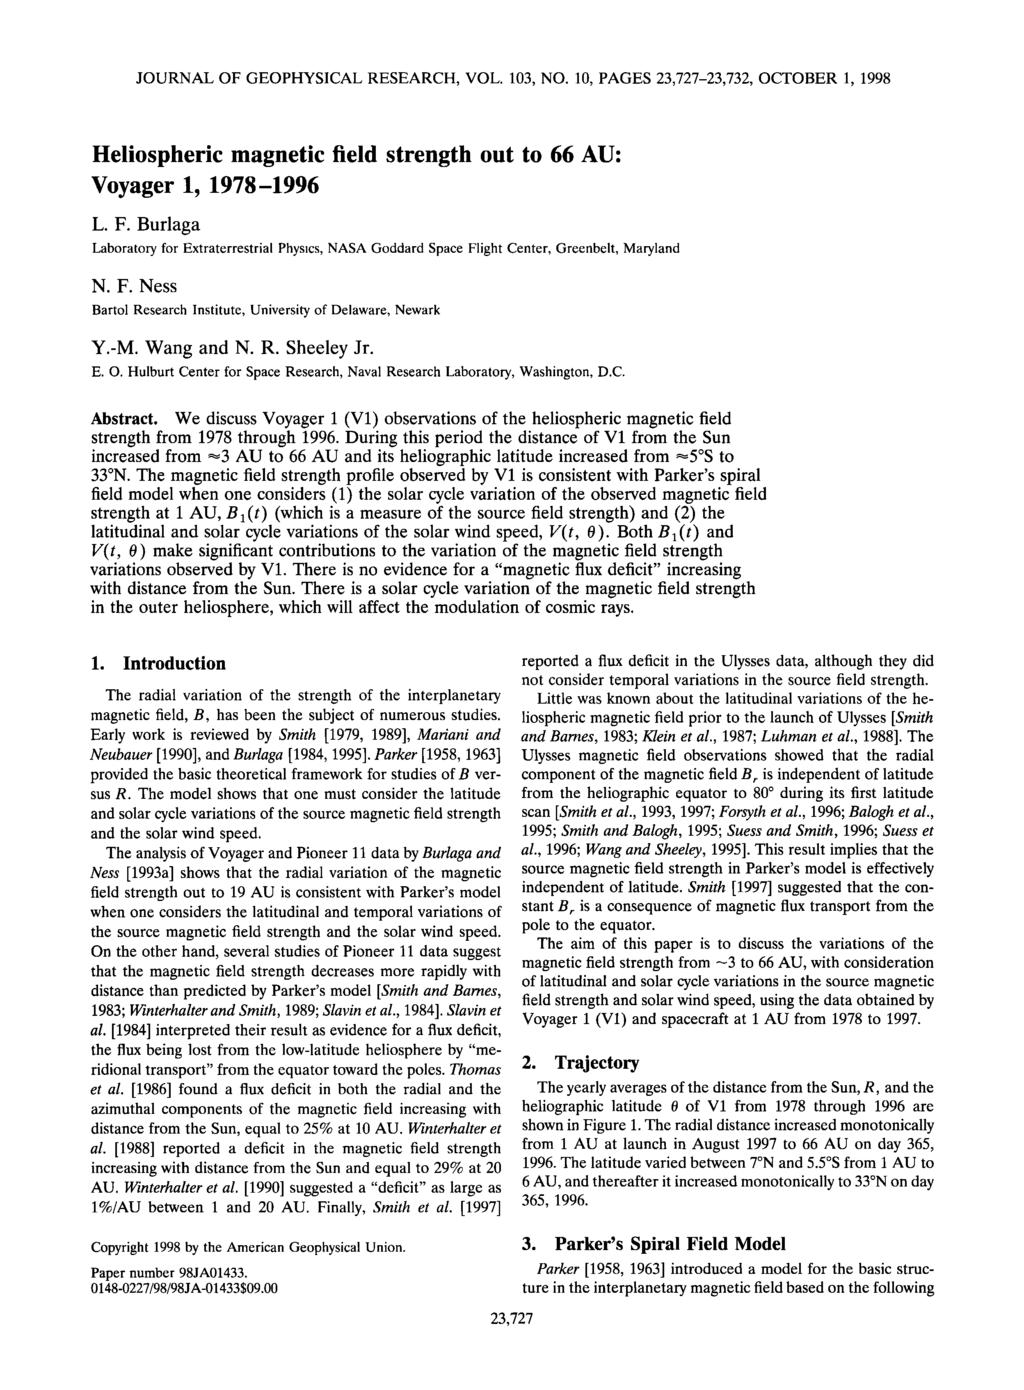 JOURNAL OF GEOPHYSICAL RESEARCH, VOL 103, NO 10, PAGES 23,727-23,732, OCTOBER 1, 1998 Heliospheric magnetic field strength out to 66 AU: Voyager 1, 1978-1996 L F Burlaga Laboratory for